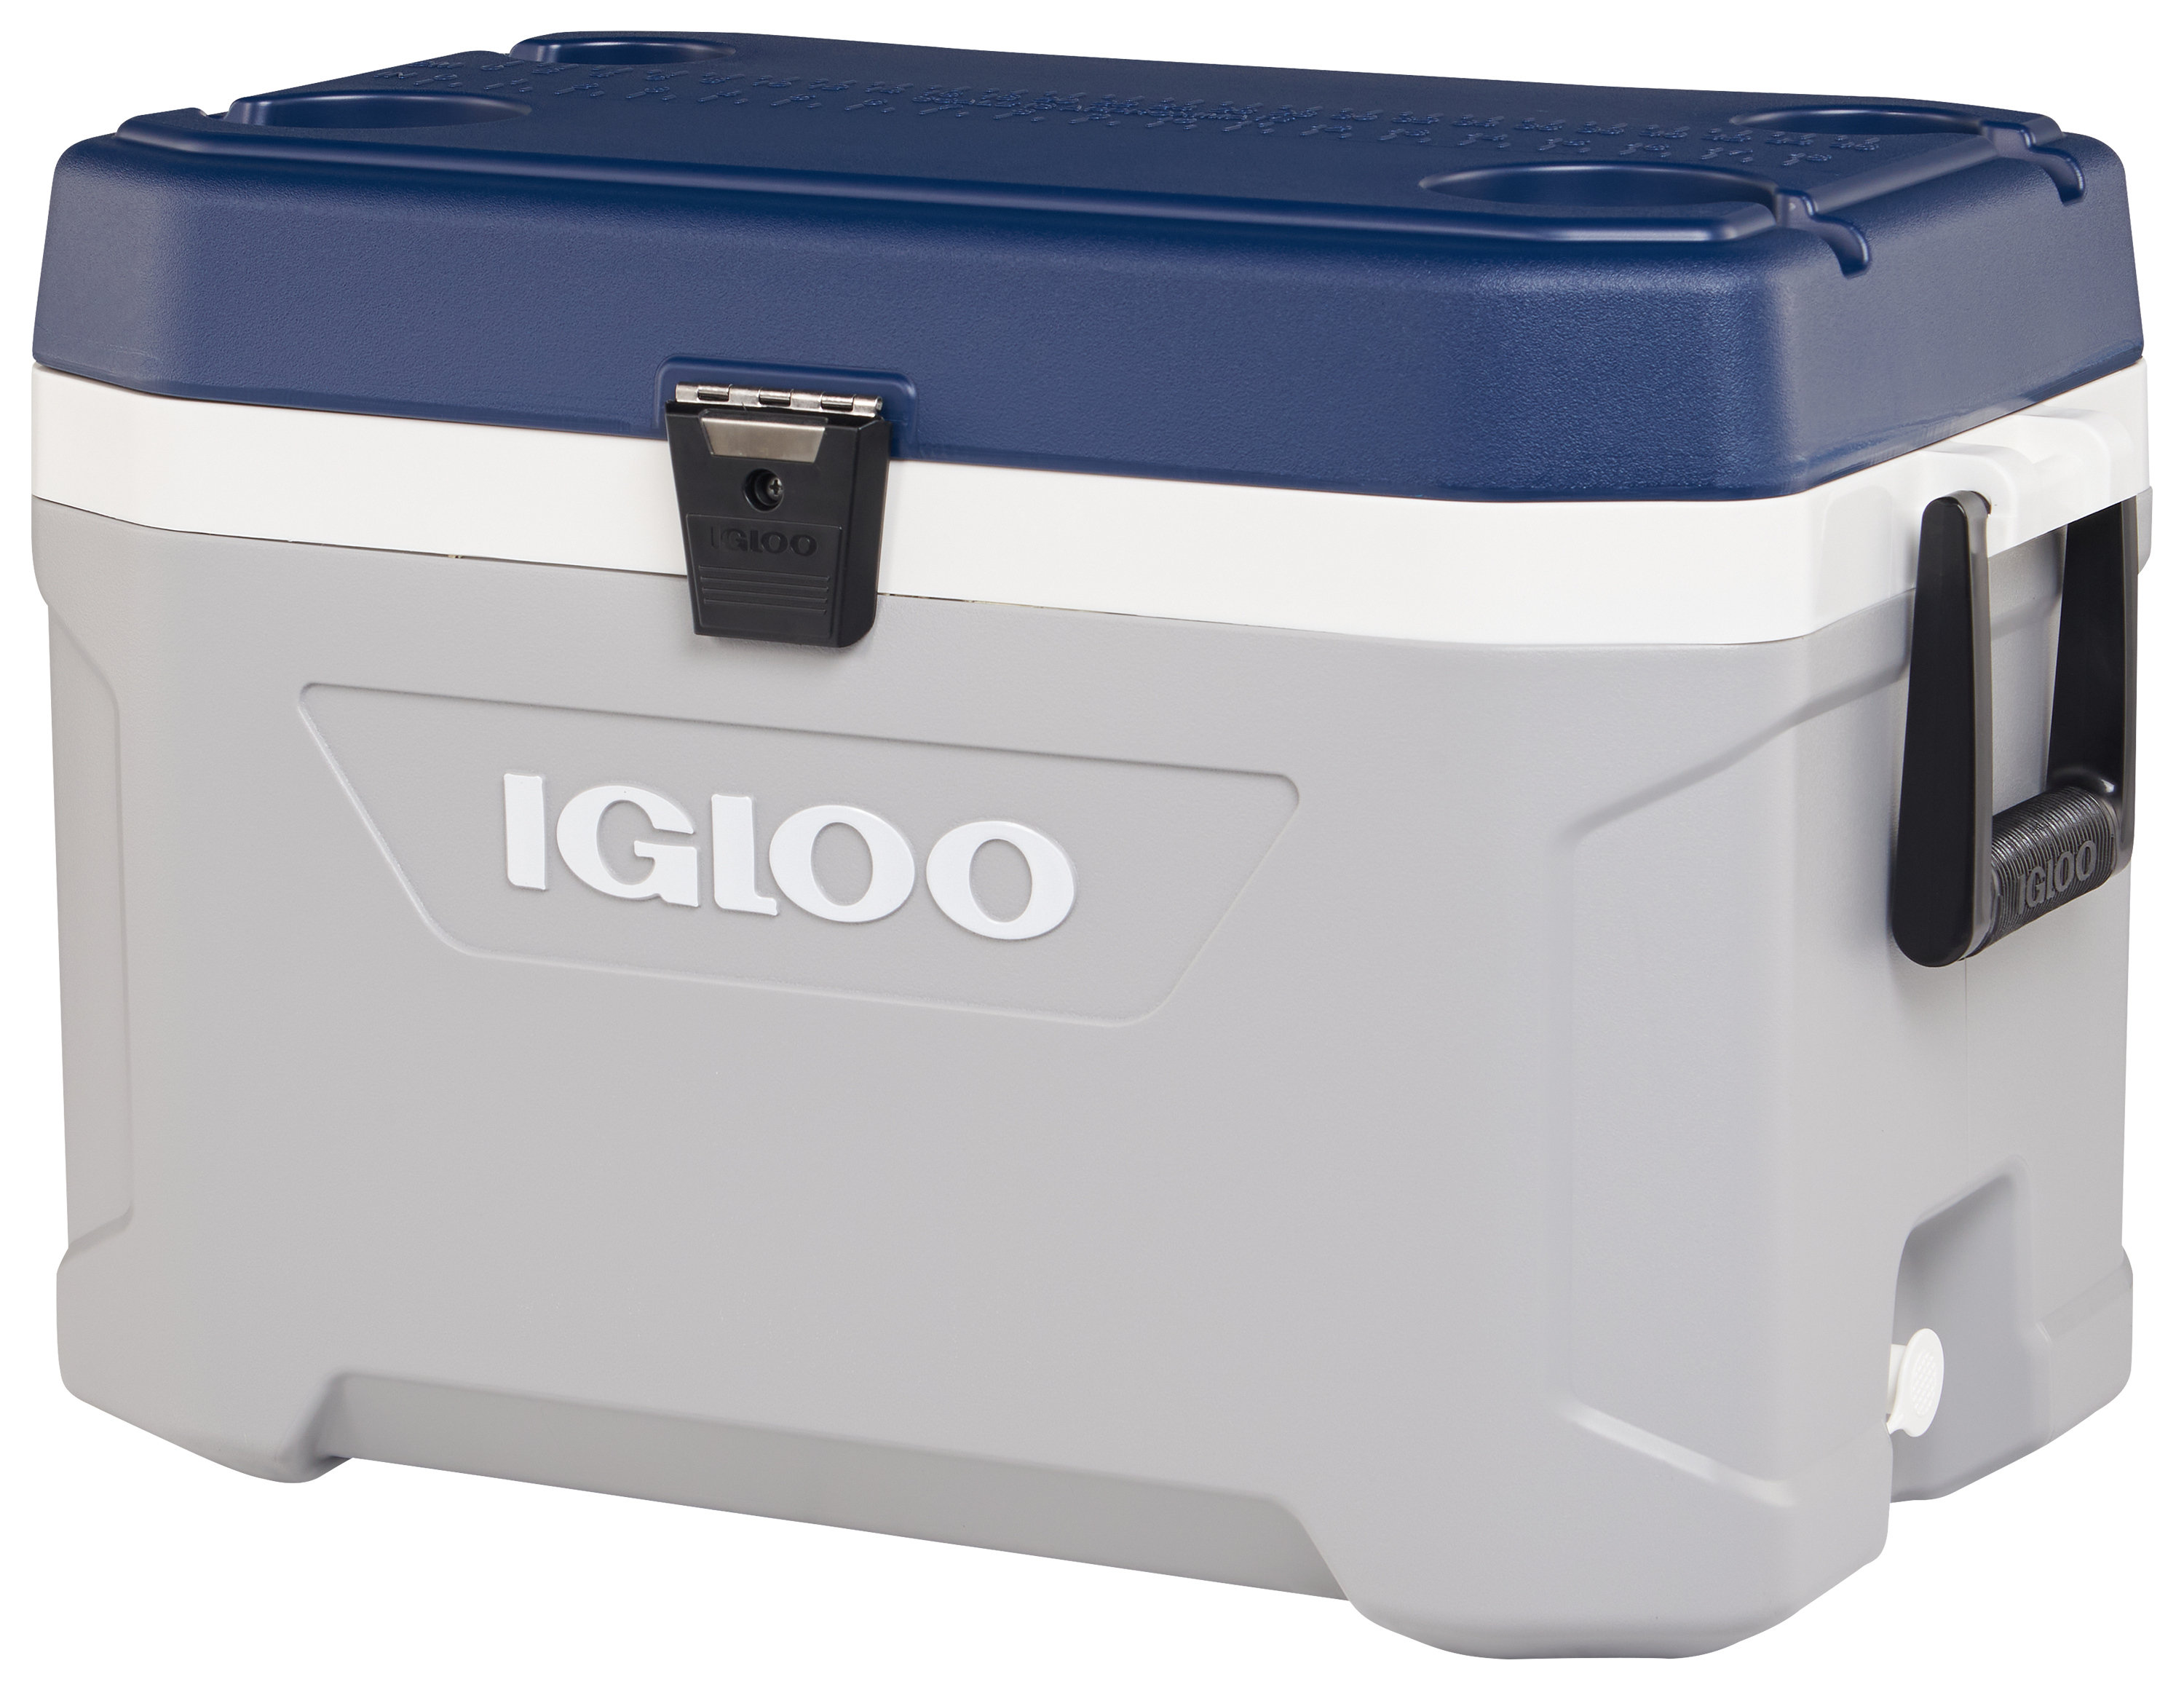 Igloo cooler in a Great fishing Rod holder 